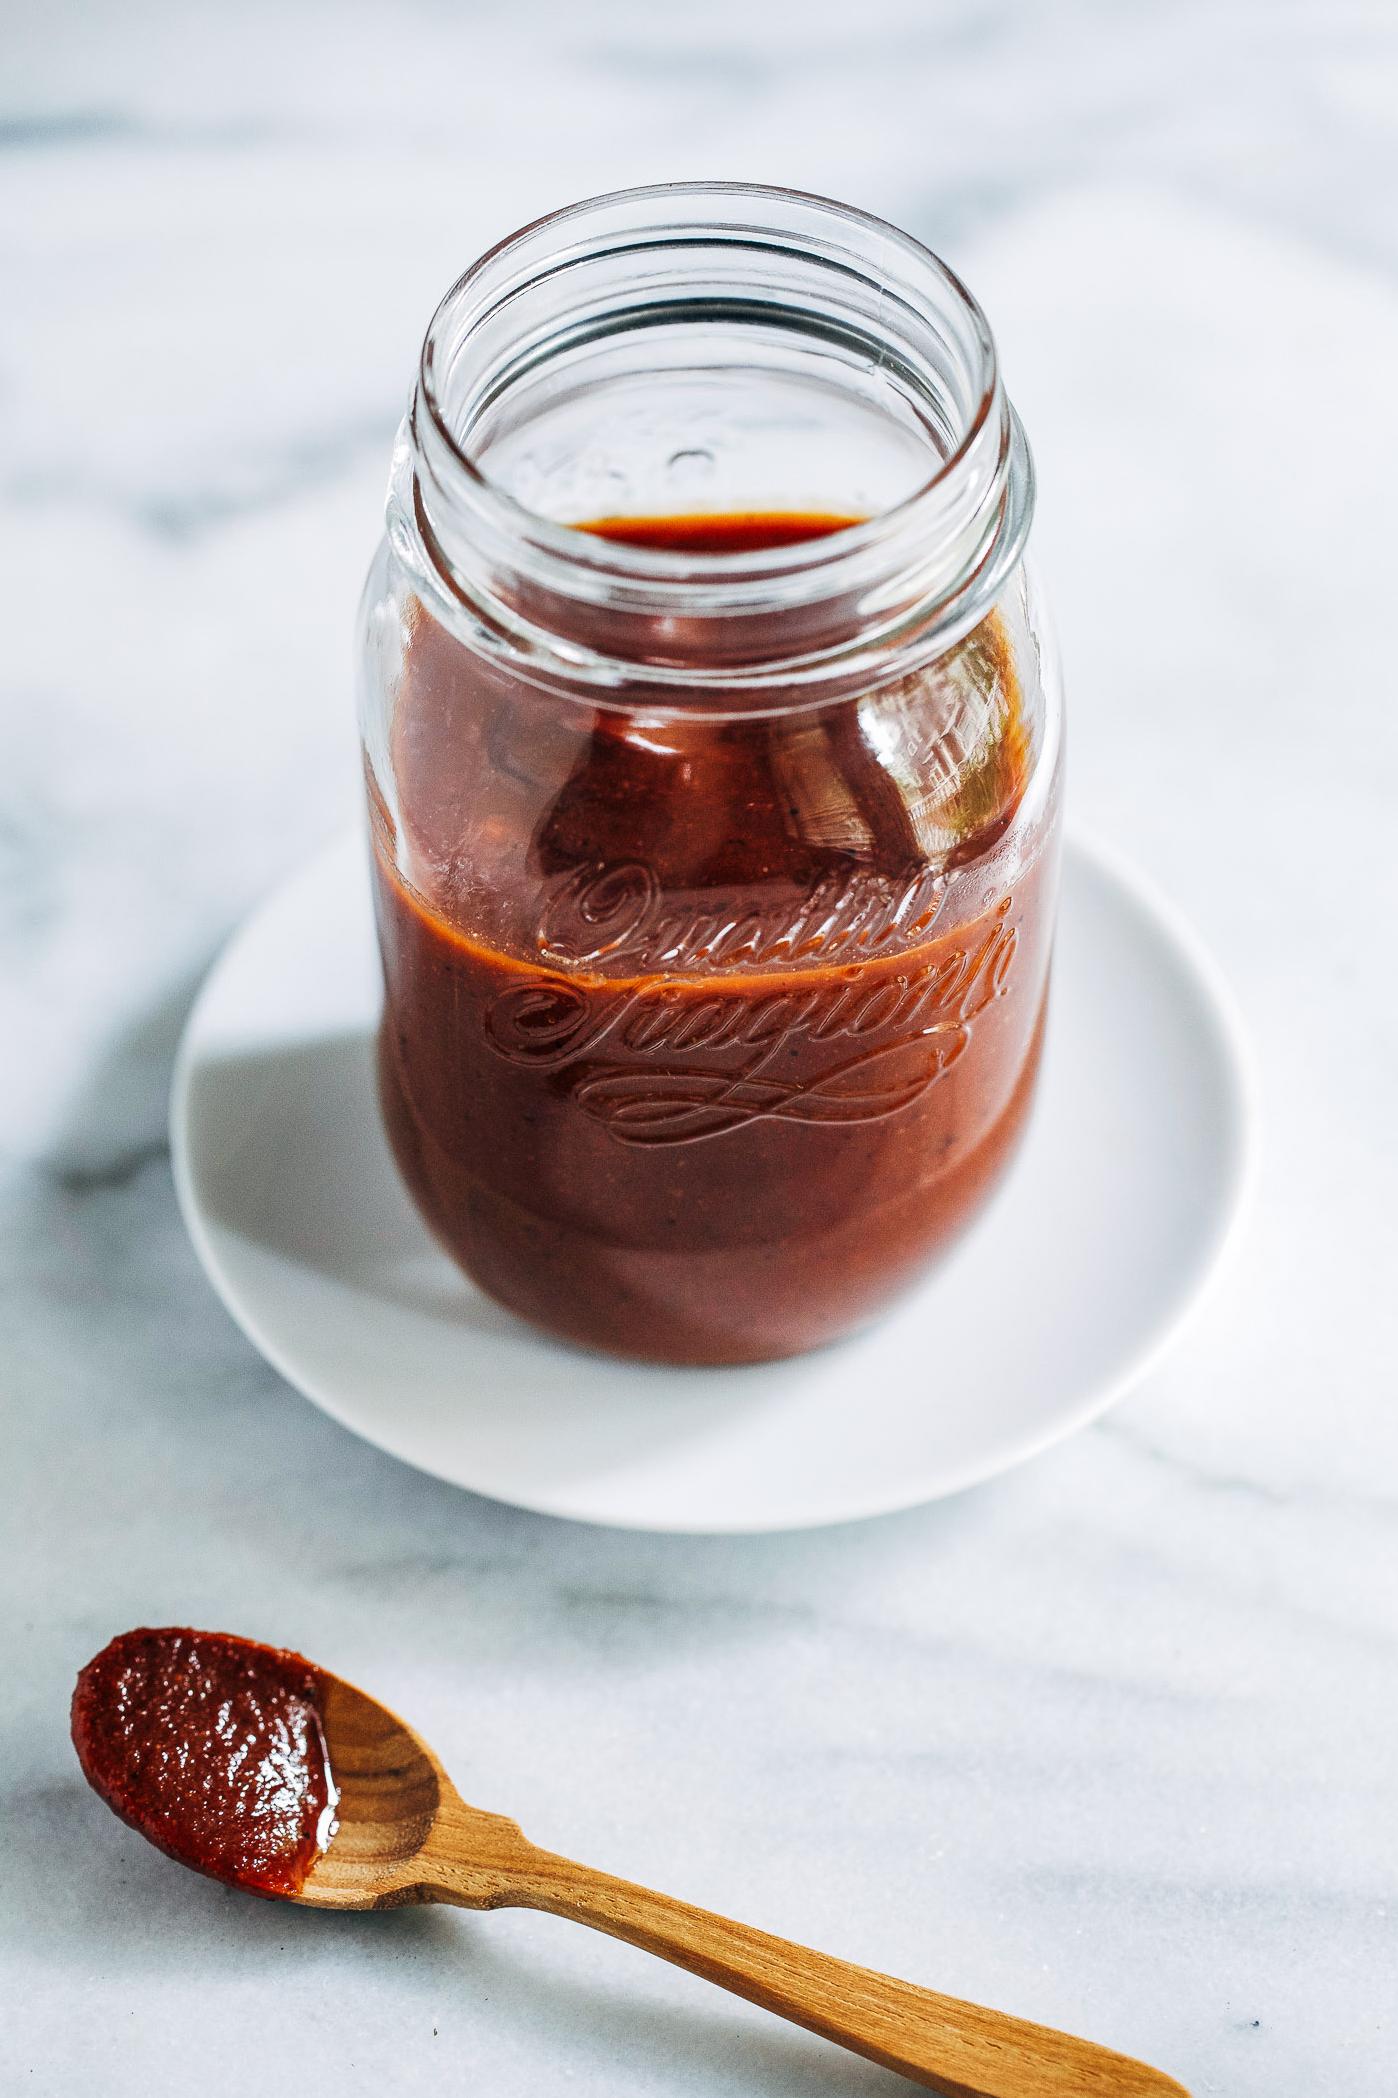  You don't need dairy to make a delicious BBQ sauce, just try this recipe!